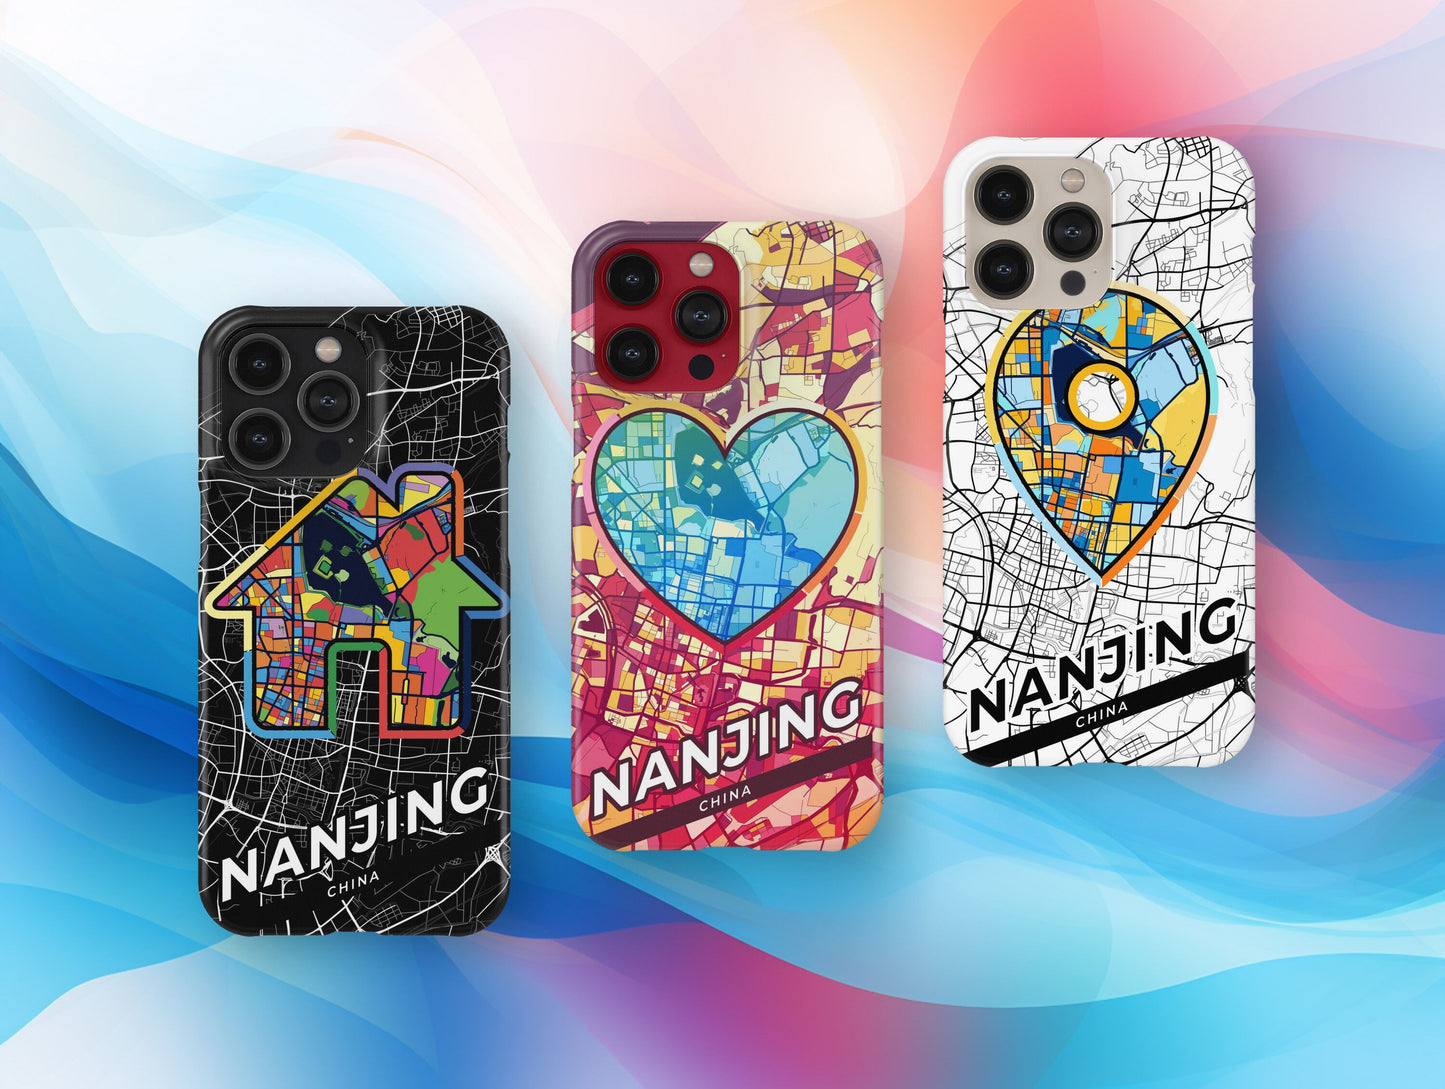 Nanjing China slim phone case with colorful icon. Birthday, wedding or housewarming gift. Couple match cases.